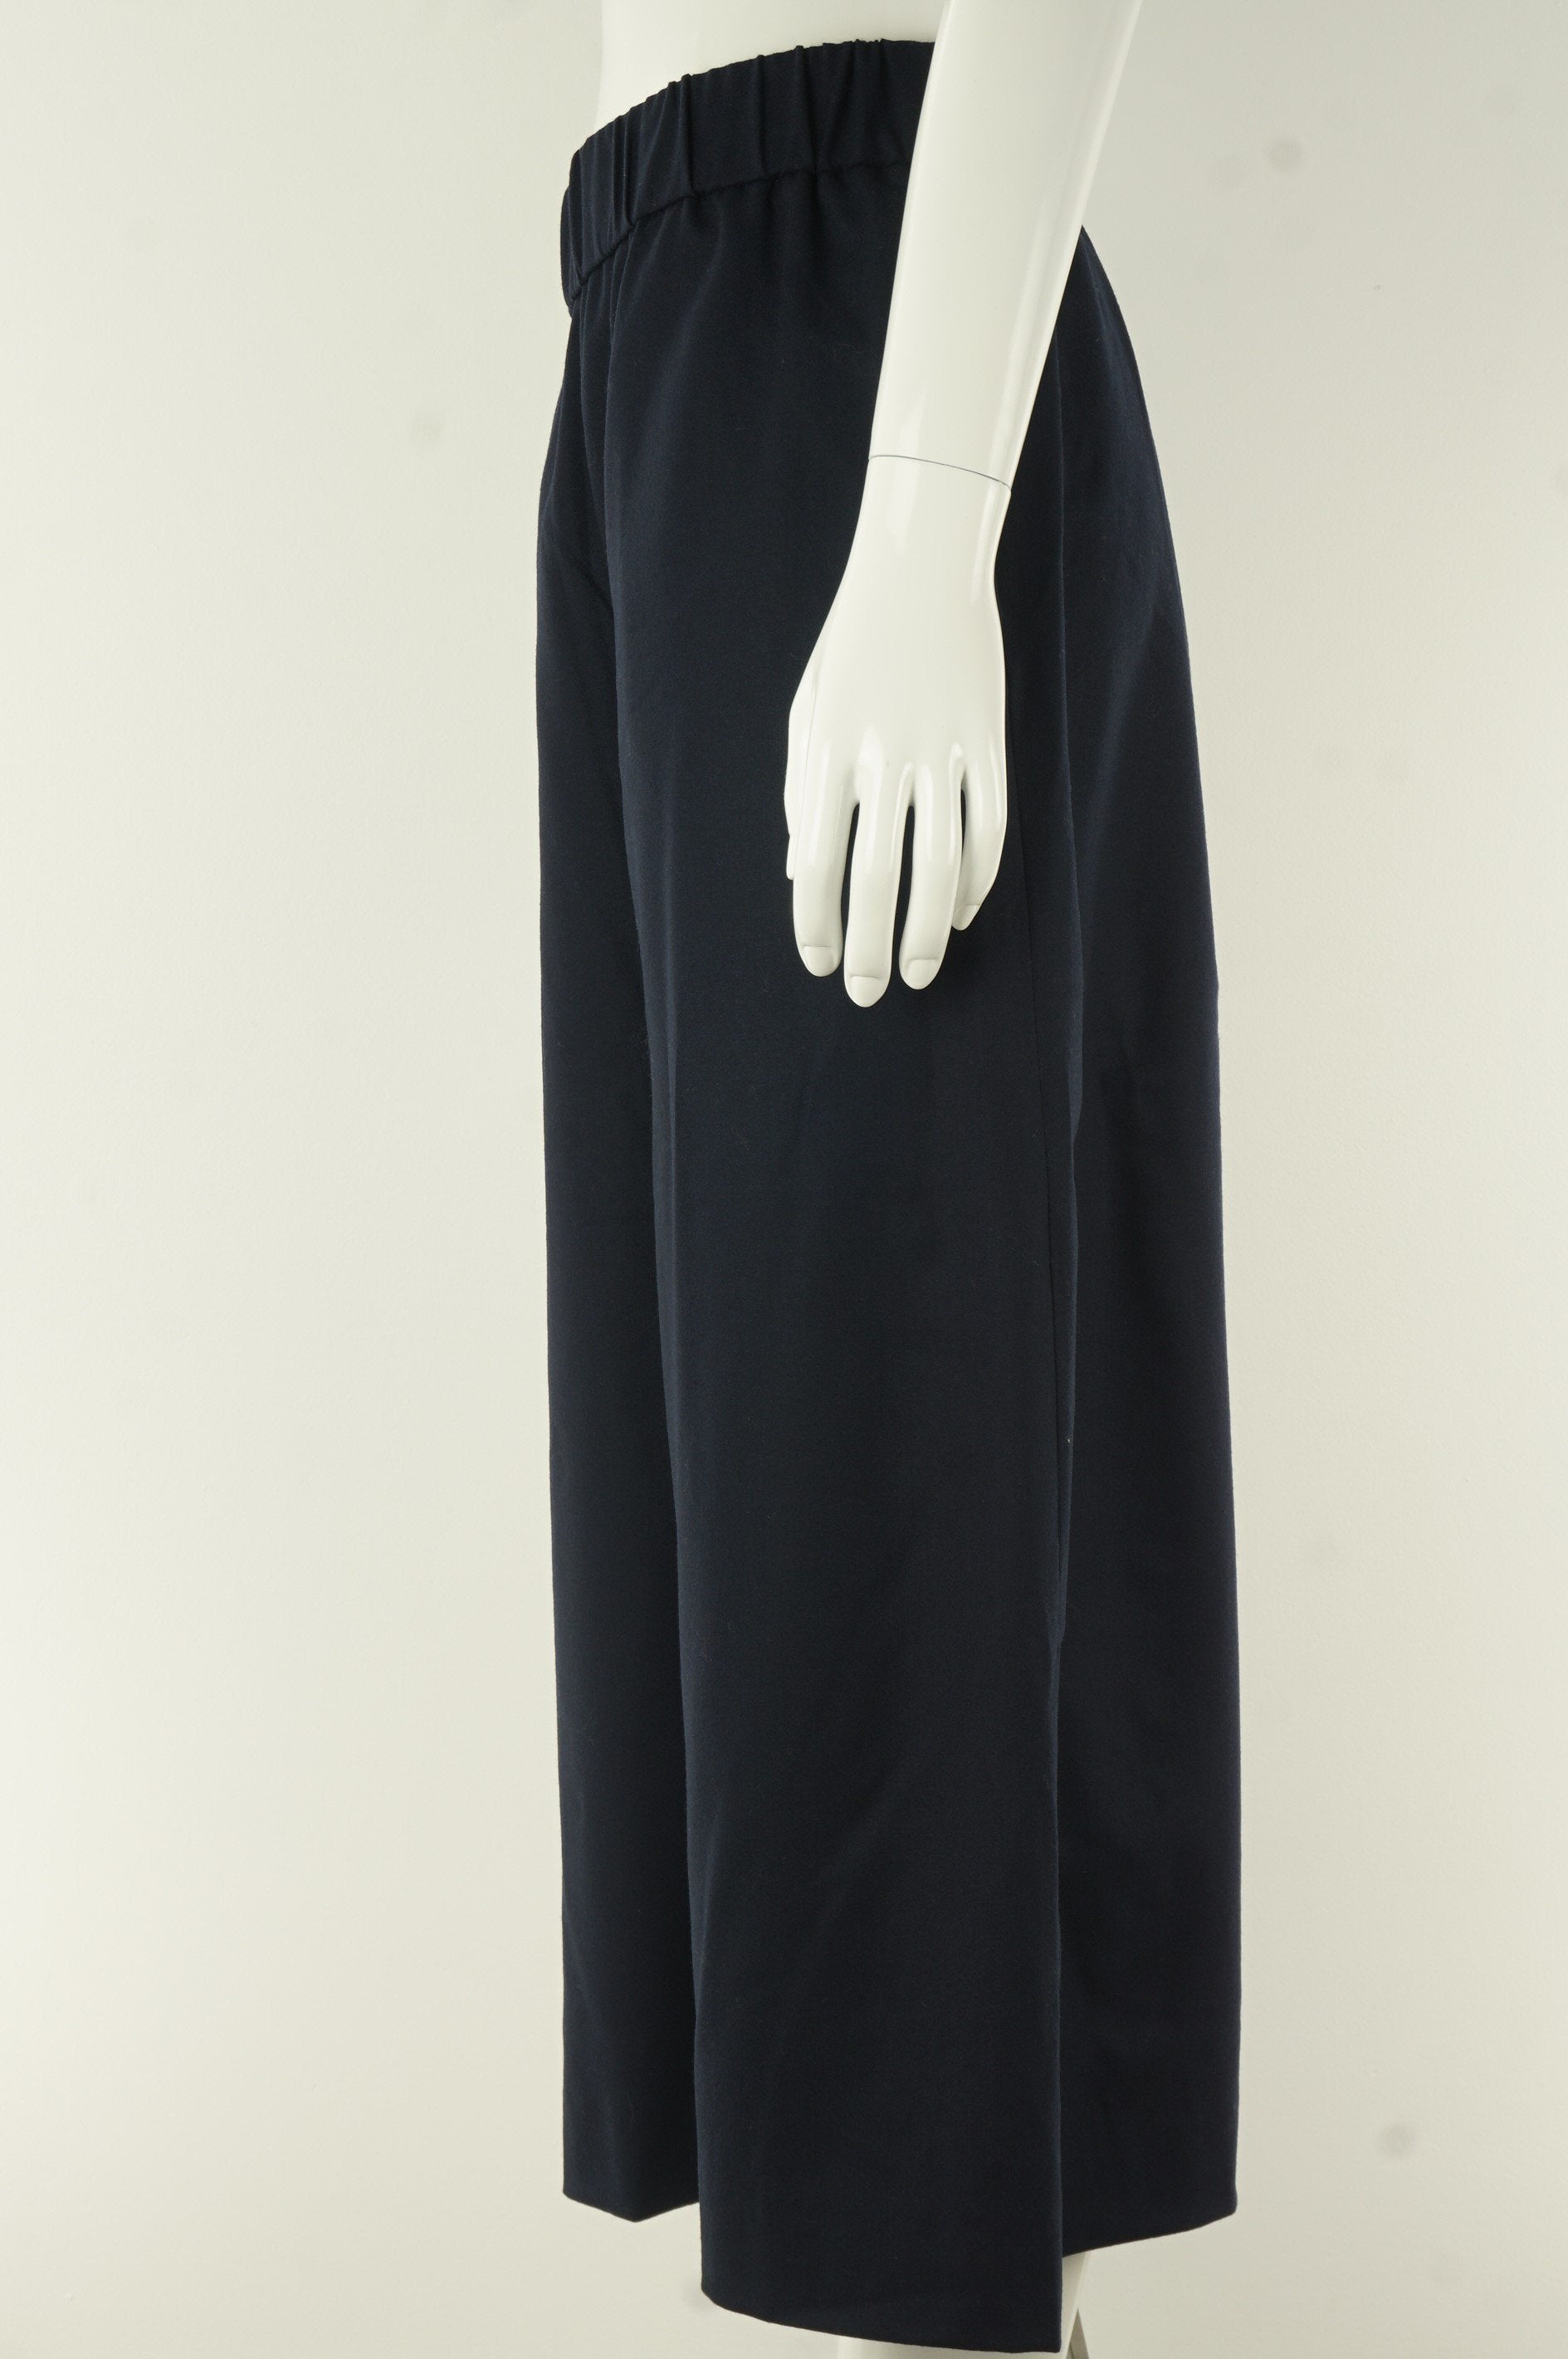 COS Wide Leg Pants With Elastic Waistband, The wide legs and the elastic waist band SCREAMS comfortableness! All natural wool material also garantees warth for the winter months., Blue, 96% Wool, 4% Elastane, women's Pants & Shorts, women's Blue Pants & Shorts, COS women's Pants & Shorts, Women's wide legged pants, women's wool pants